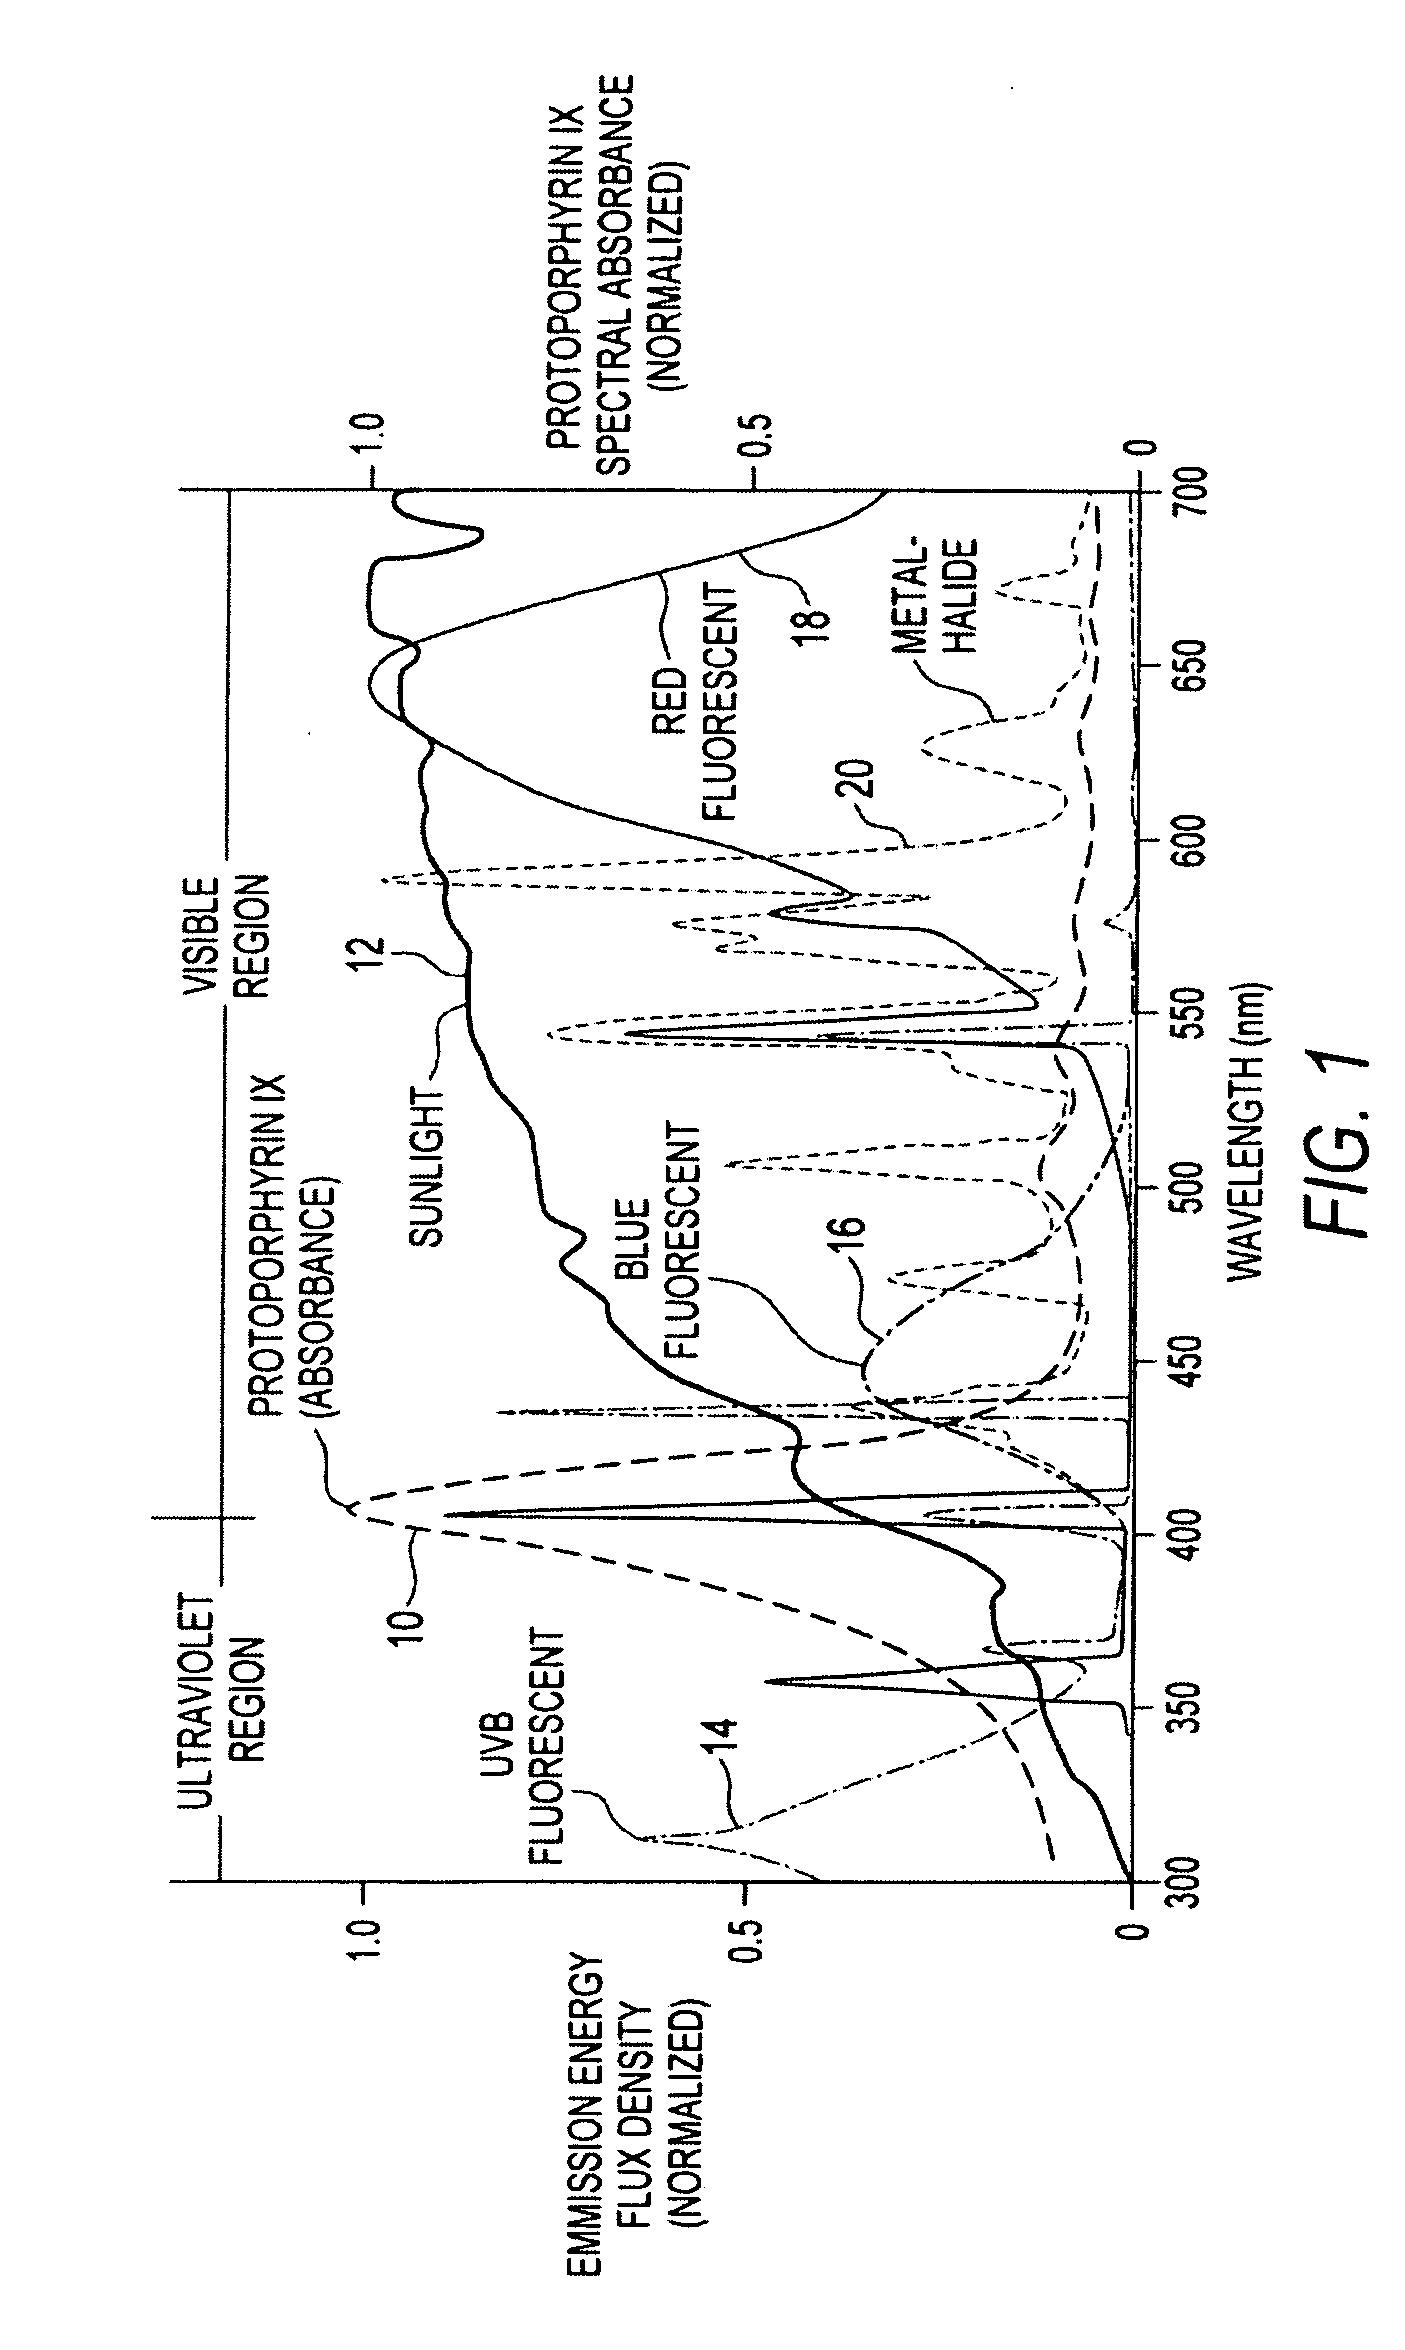 System for treatment of skin conditions using at least one narrow band light source in a skin brush having an oscillating brushhead